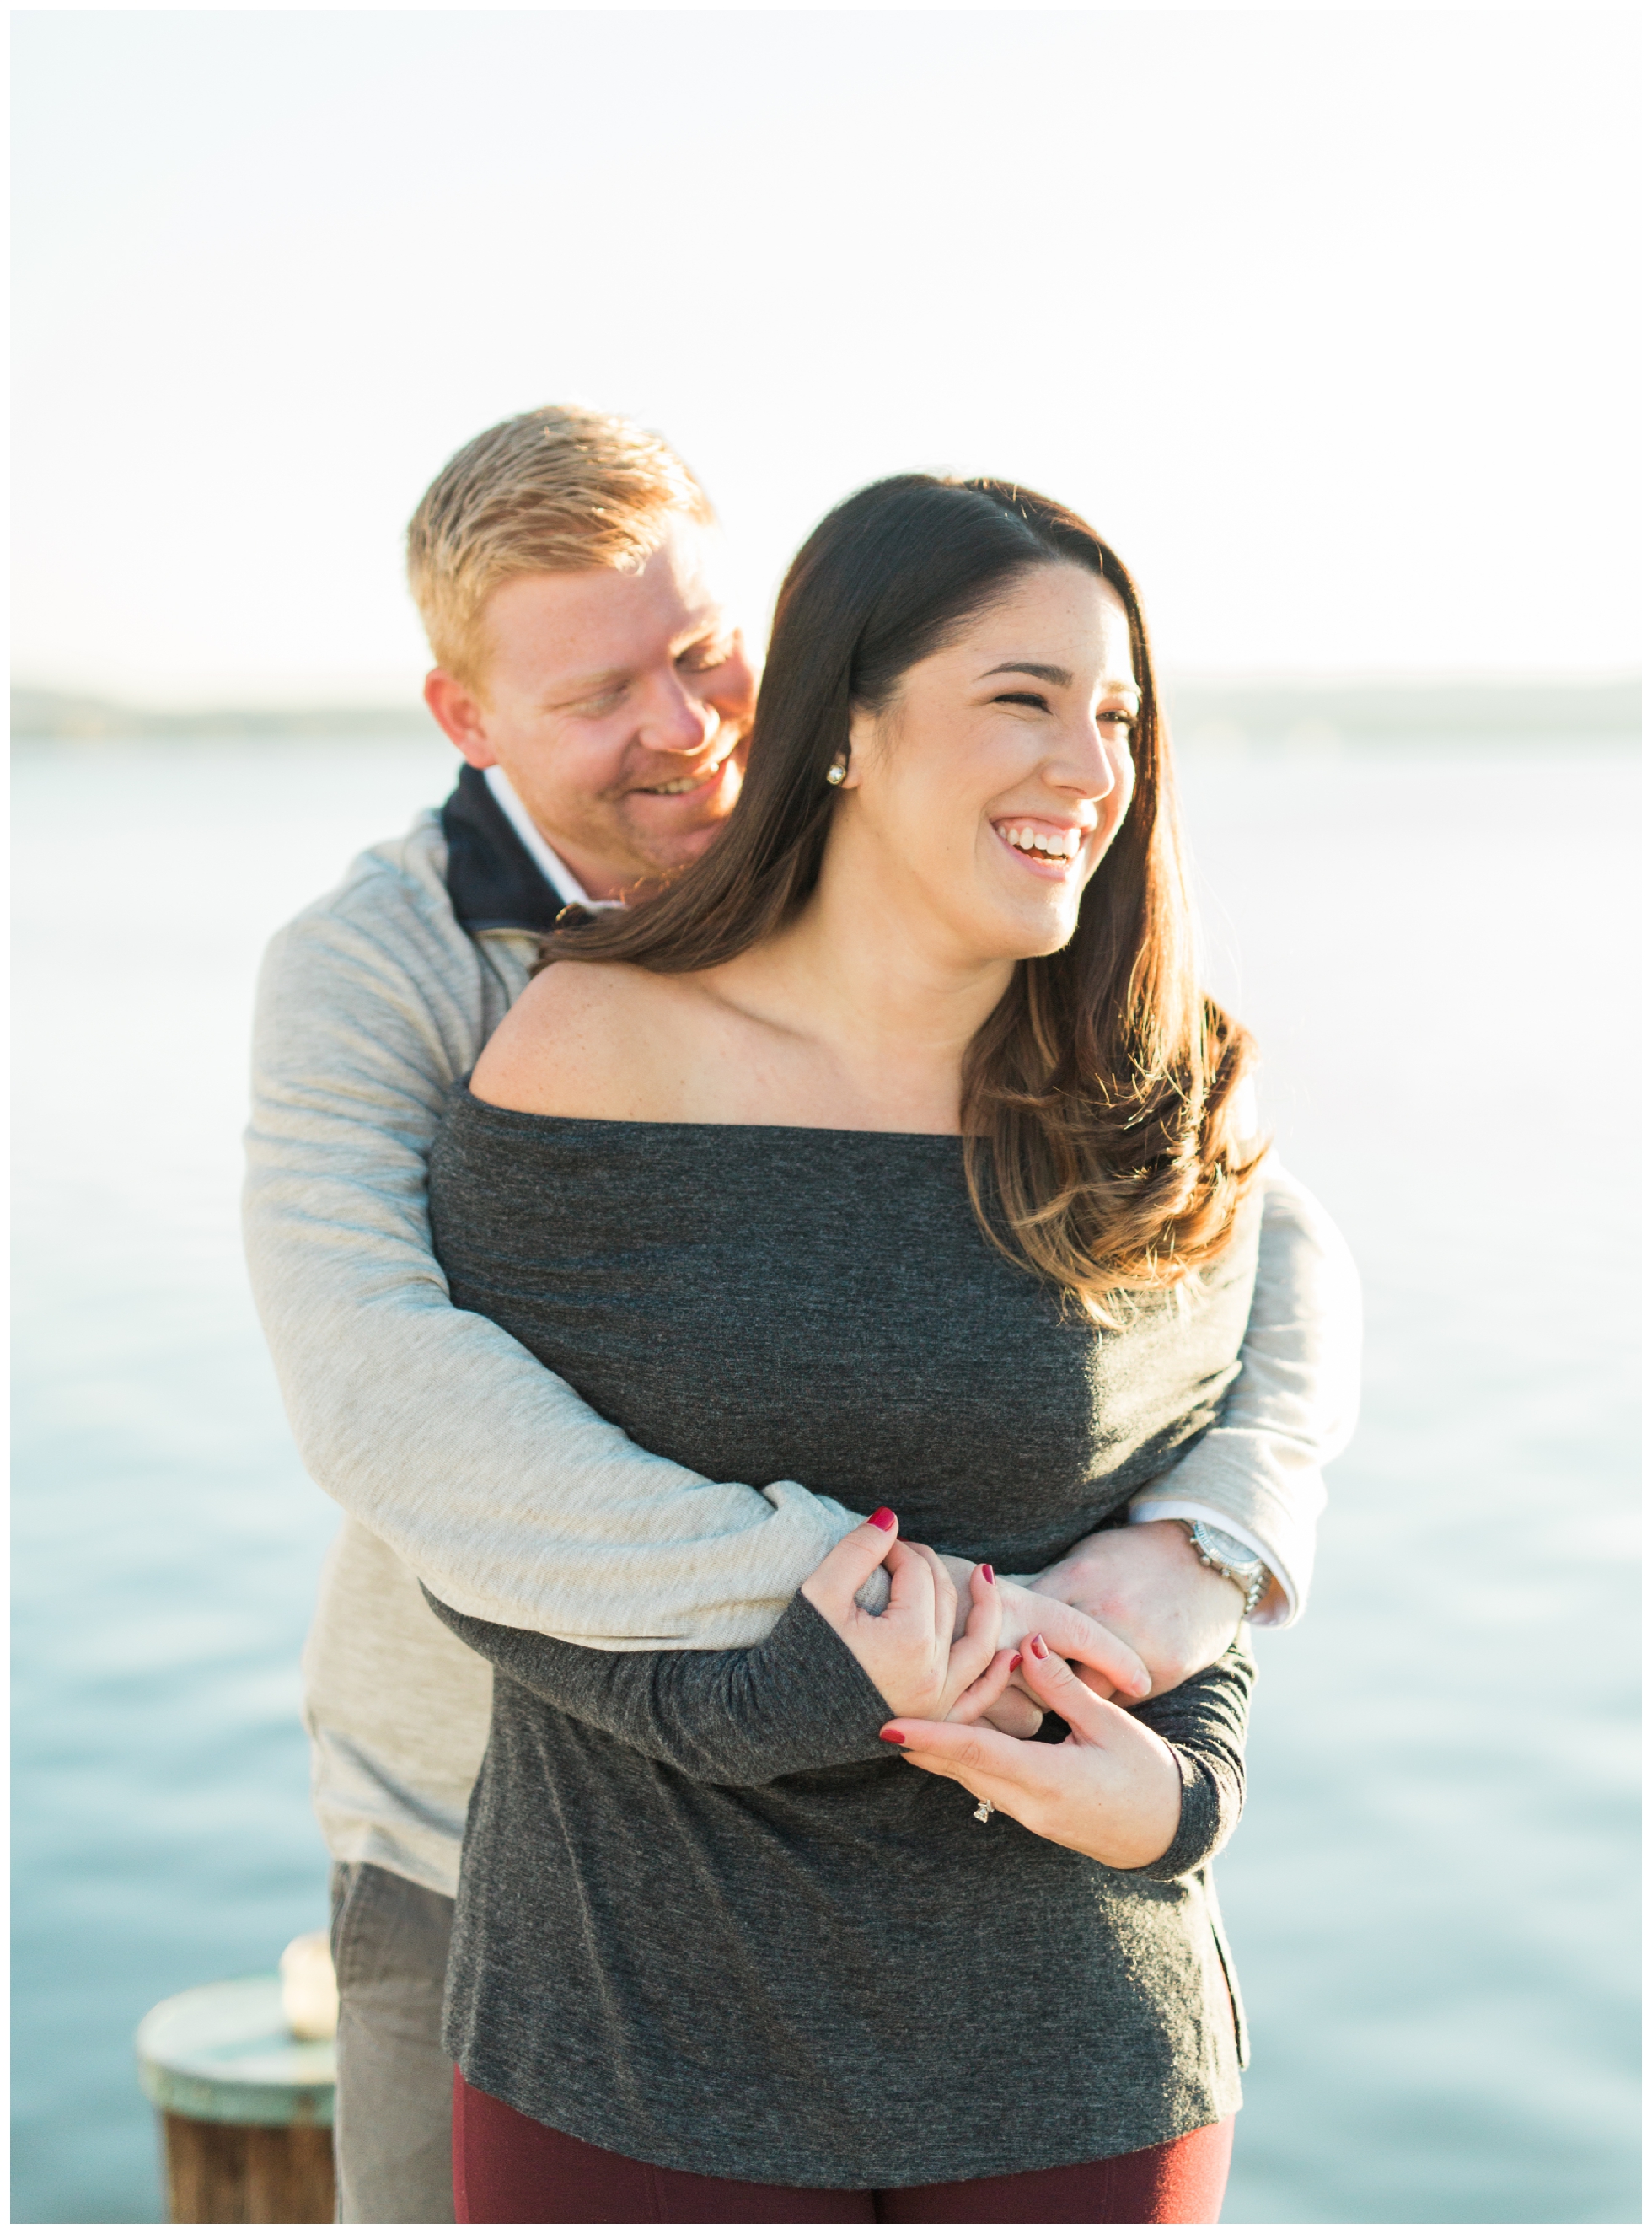 A Glowing November Sunrise Engagement Session in Old Town Alexandria